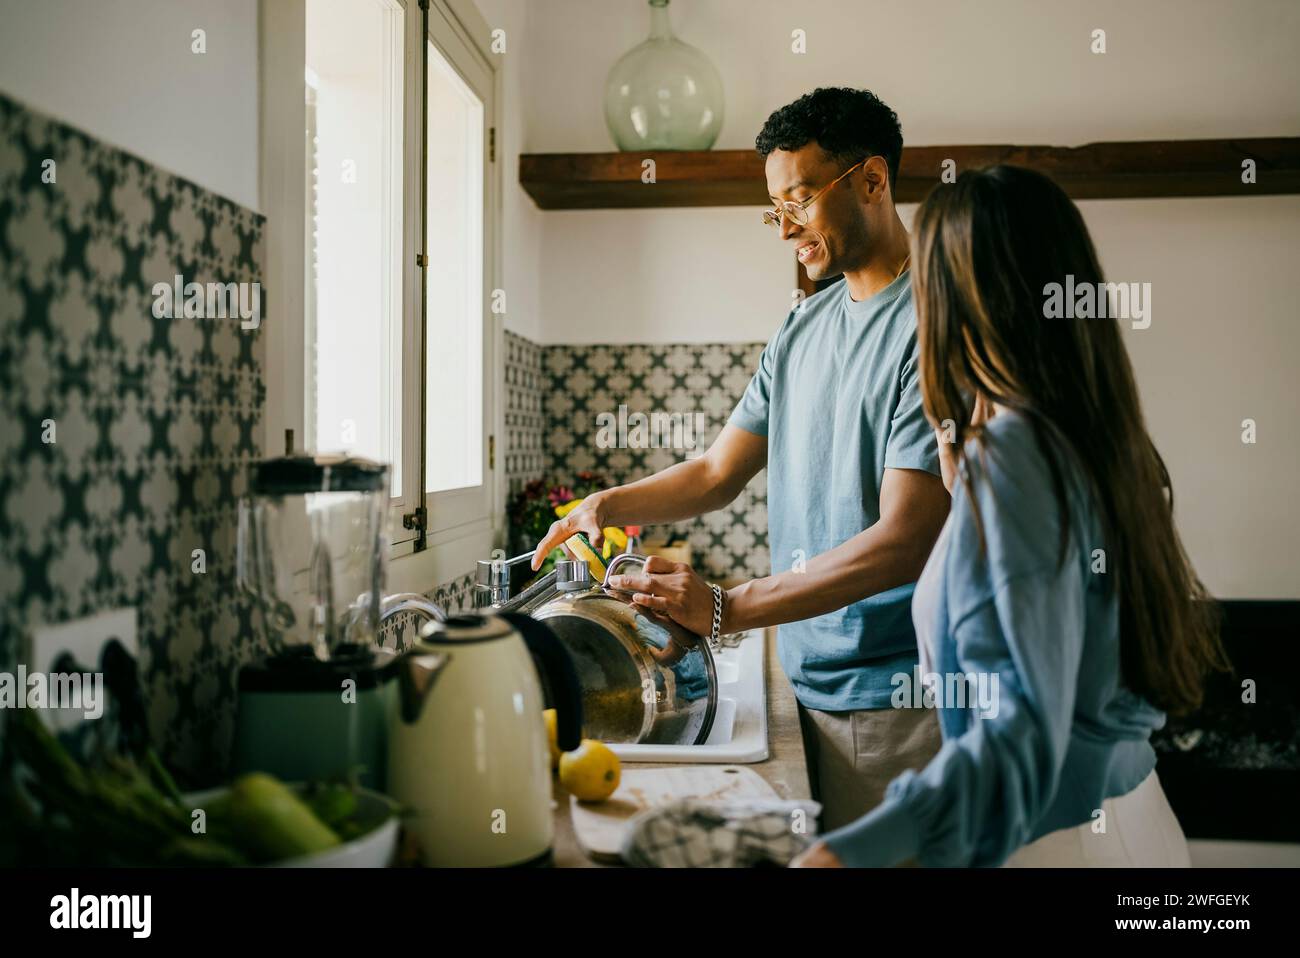 Young man and woman washing dishes together in kitchen sink at home Stock Photo